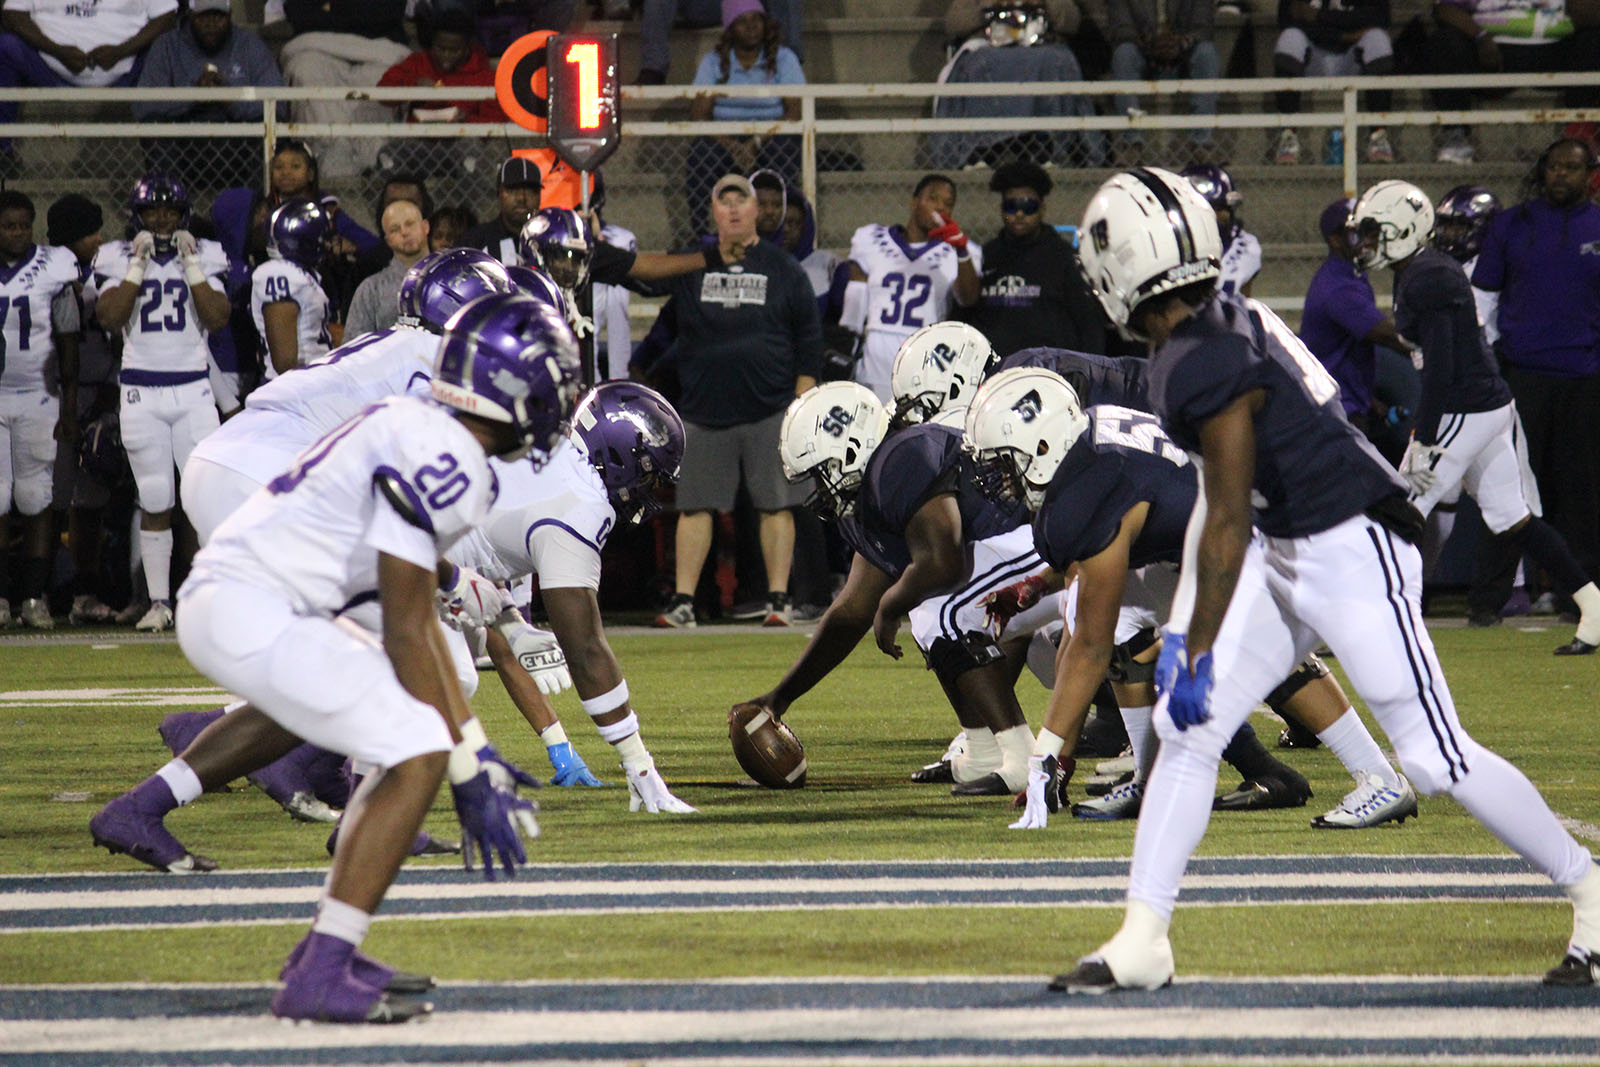 Clay-Chalkville falls to Parker in shocking first-round exit, 7-6